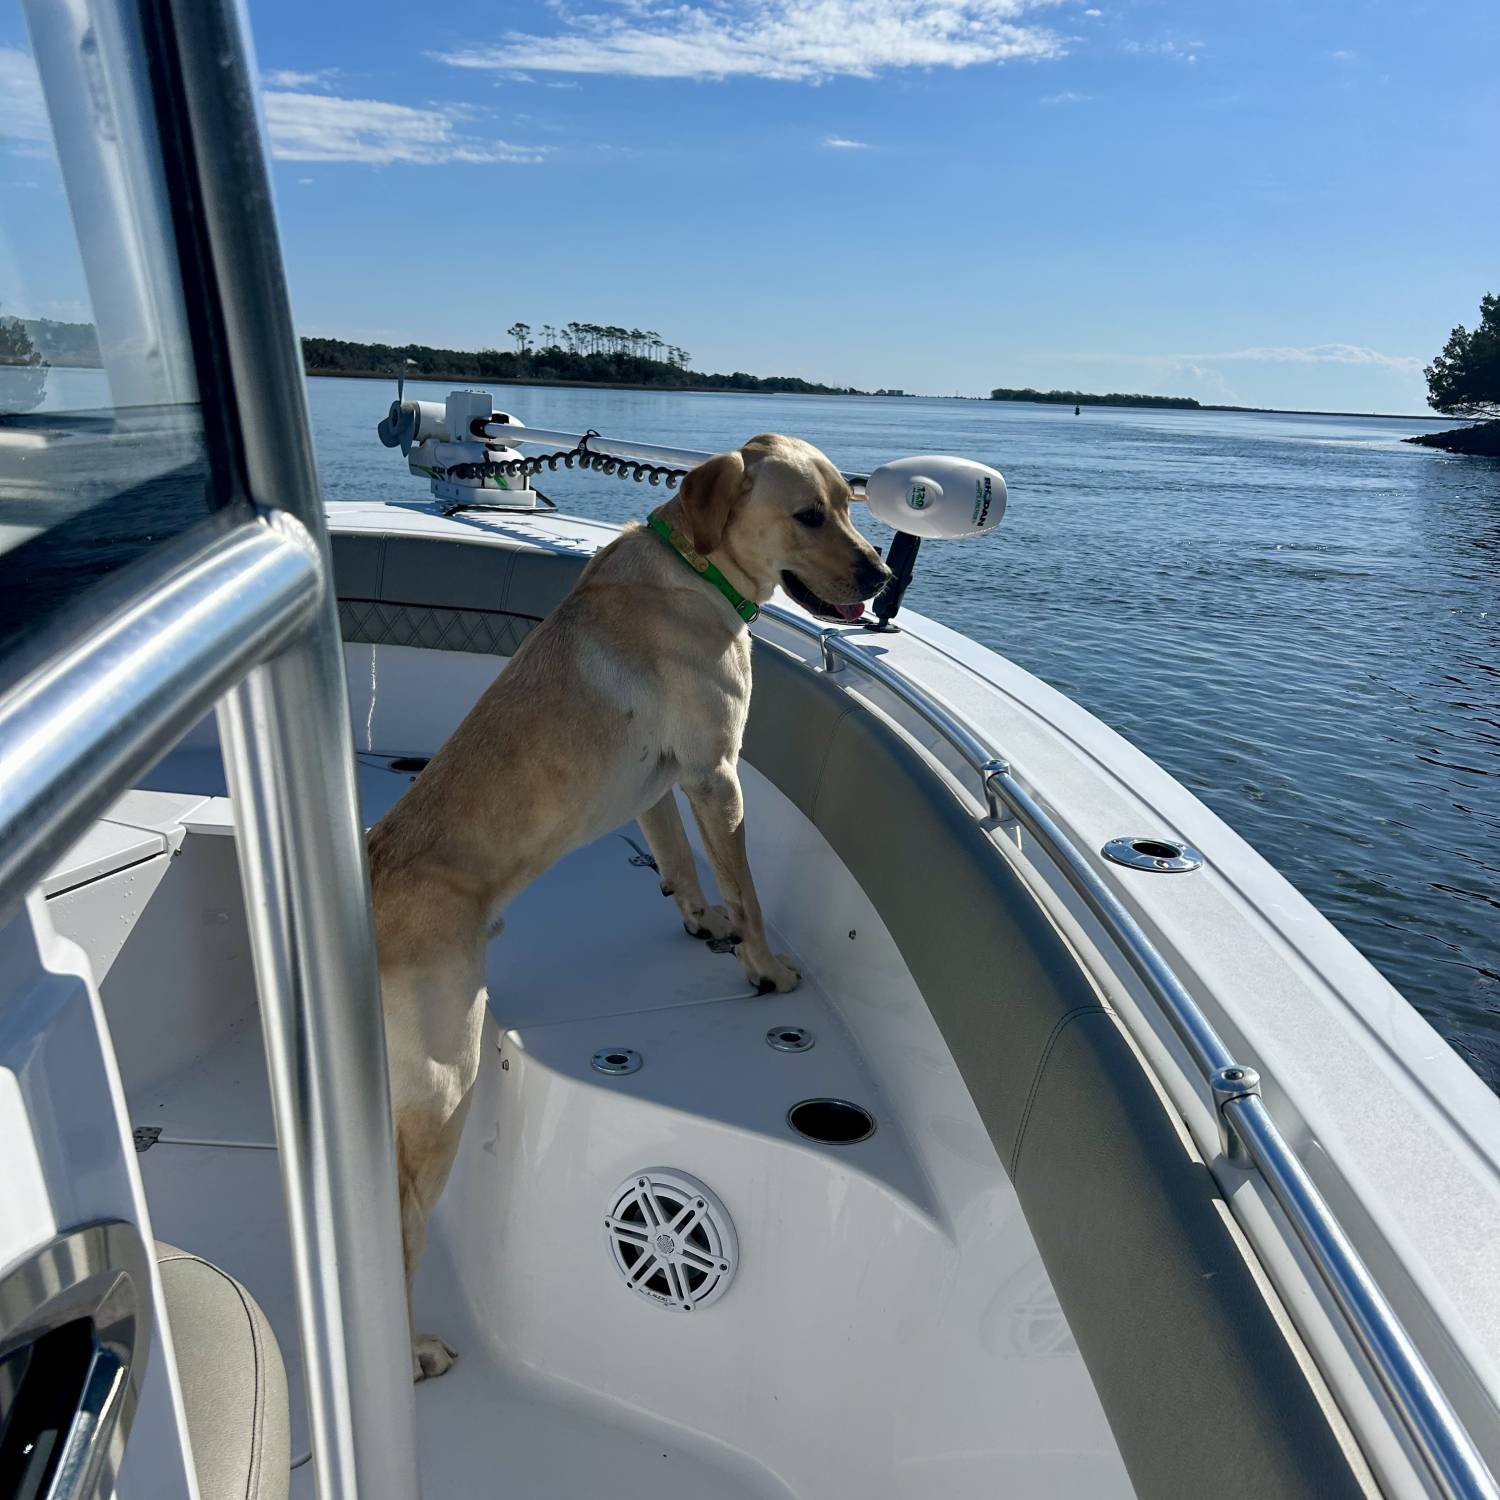 Sunny day boat ride with the pup.